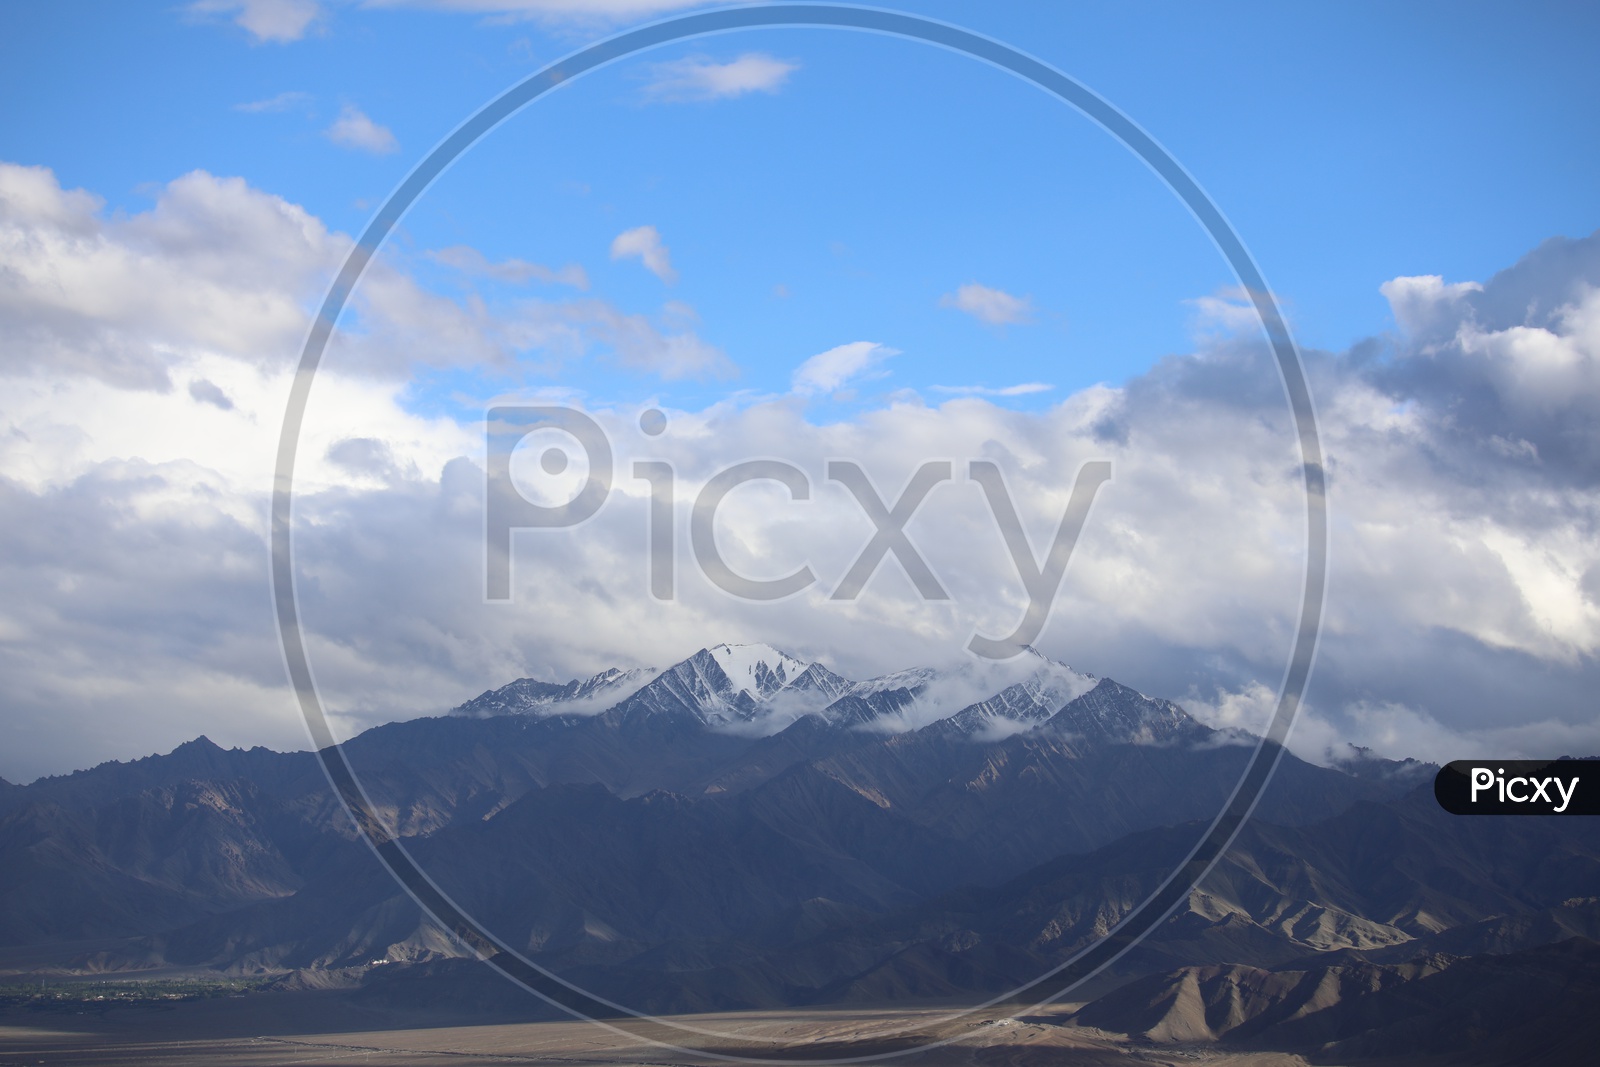 Beautiful Landscape of Snow Capped Mountains, Leh